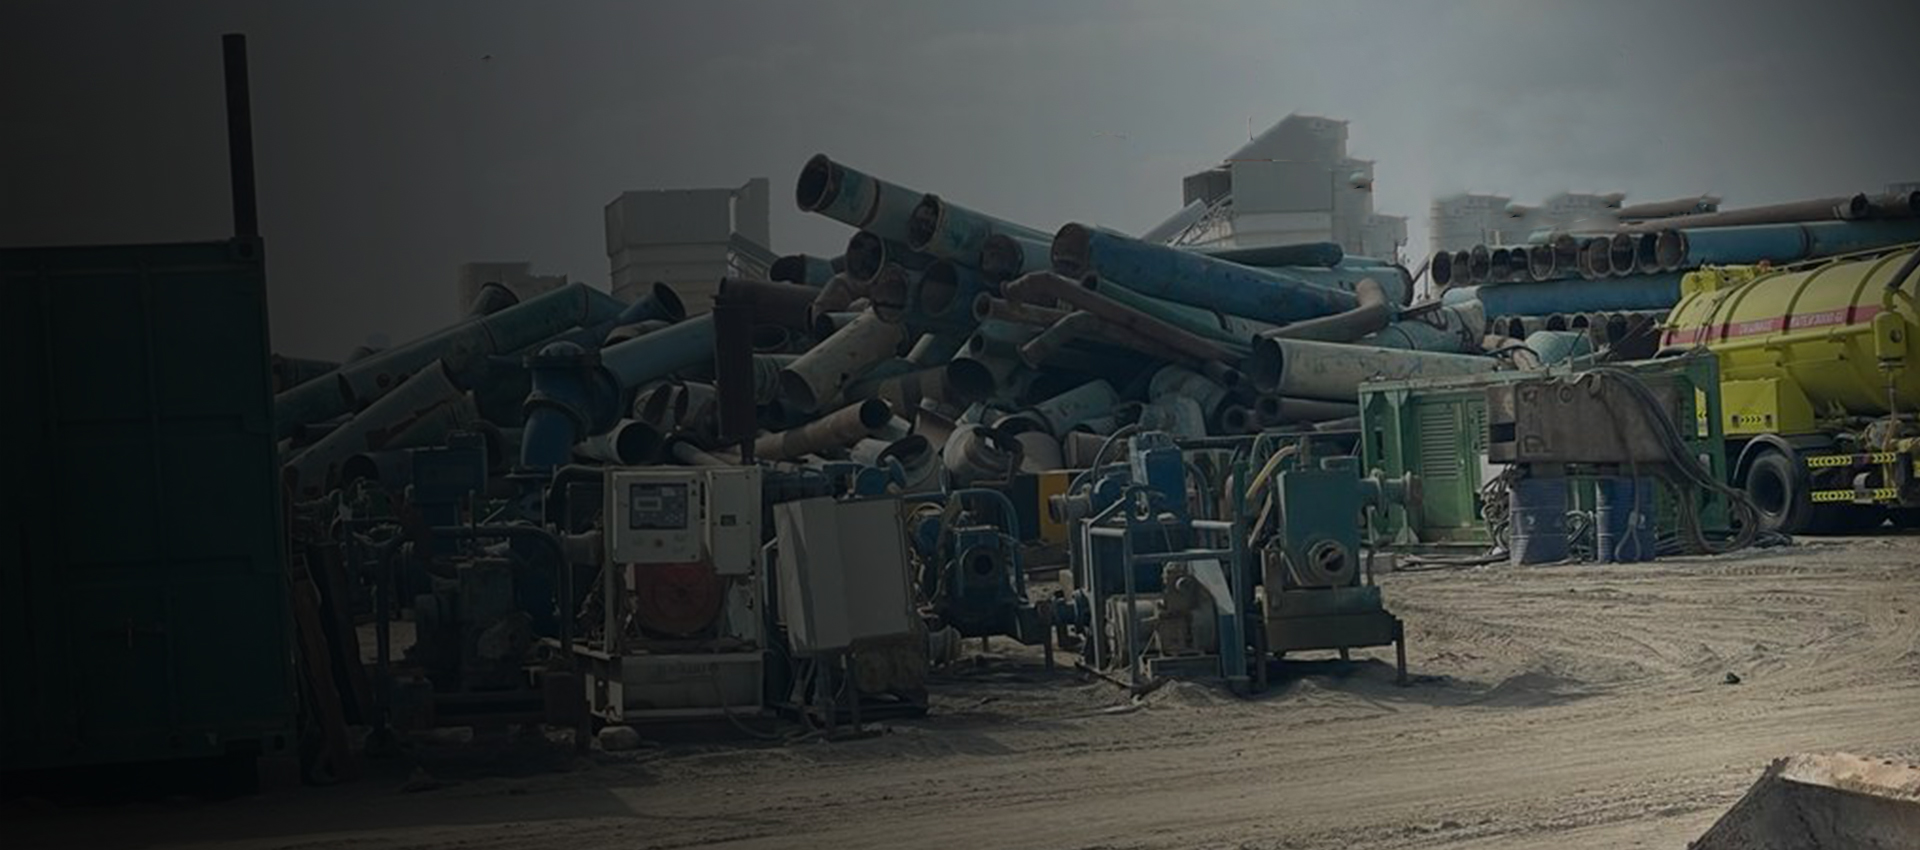 View of scrap yard with rods and scrap metal